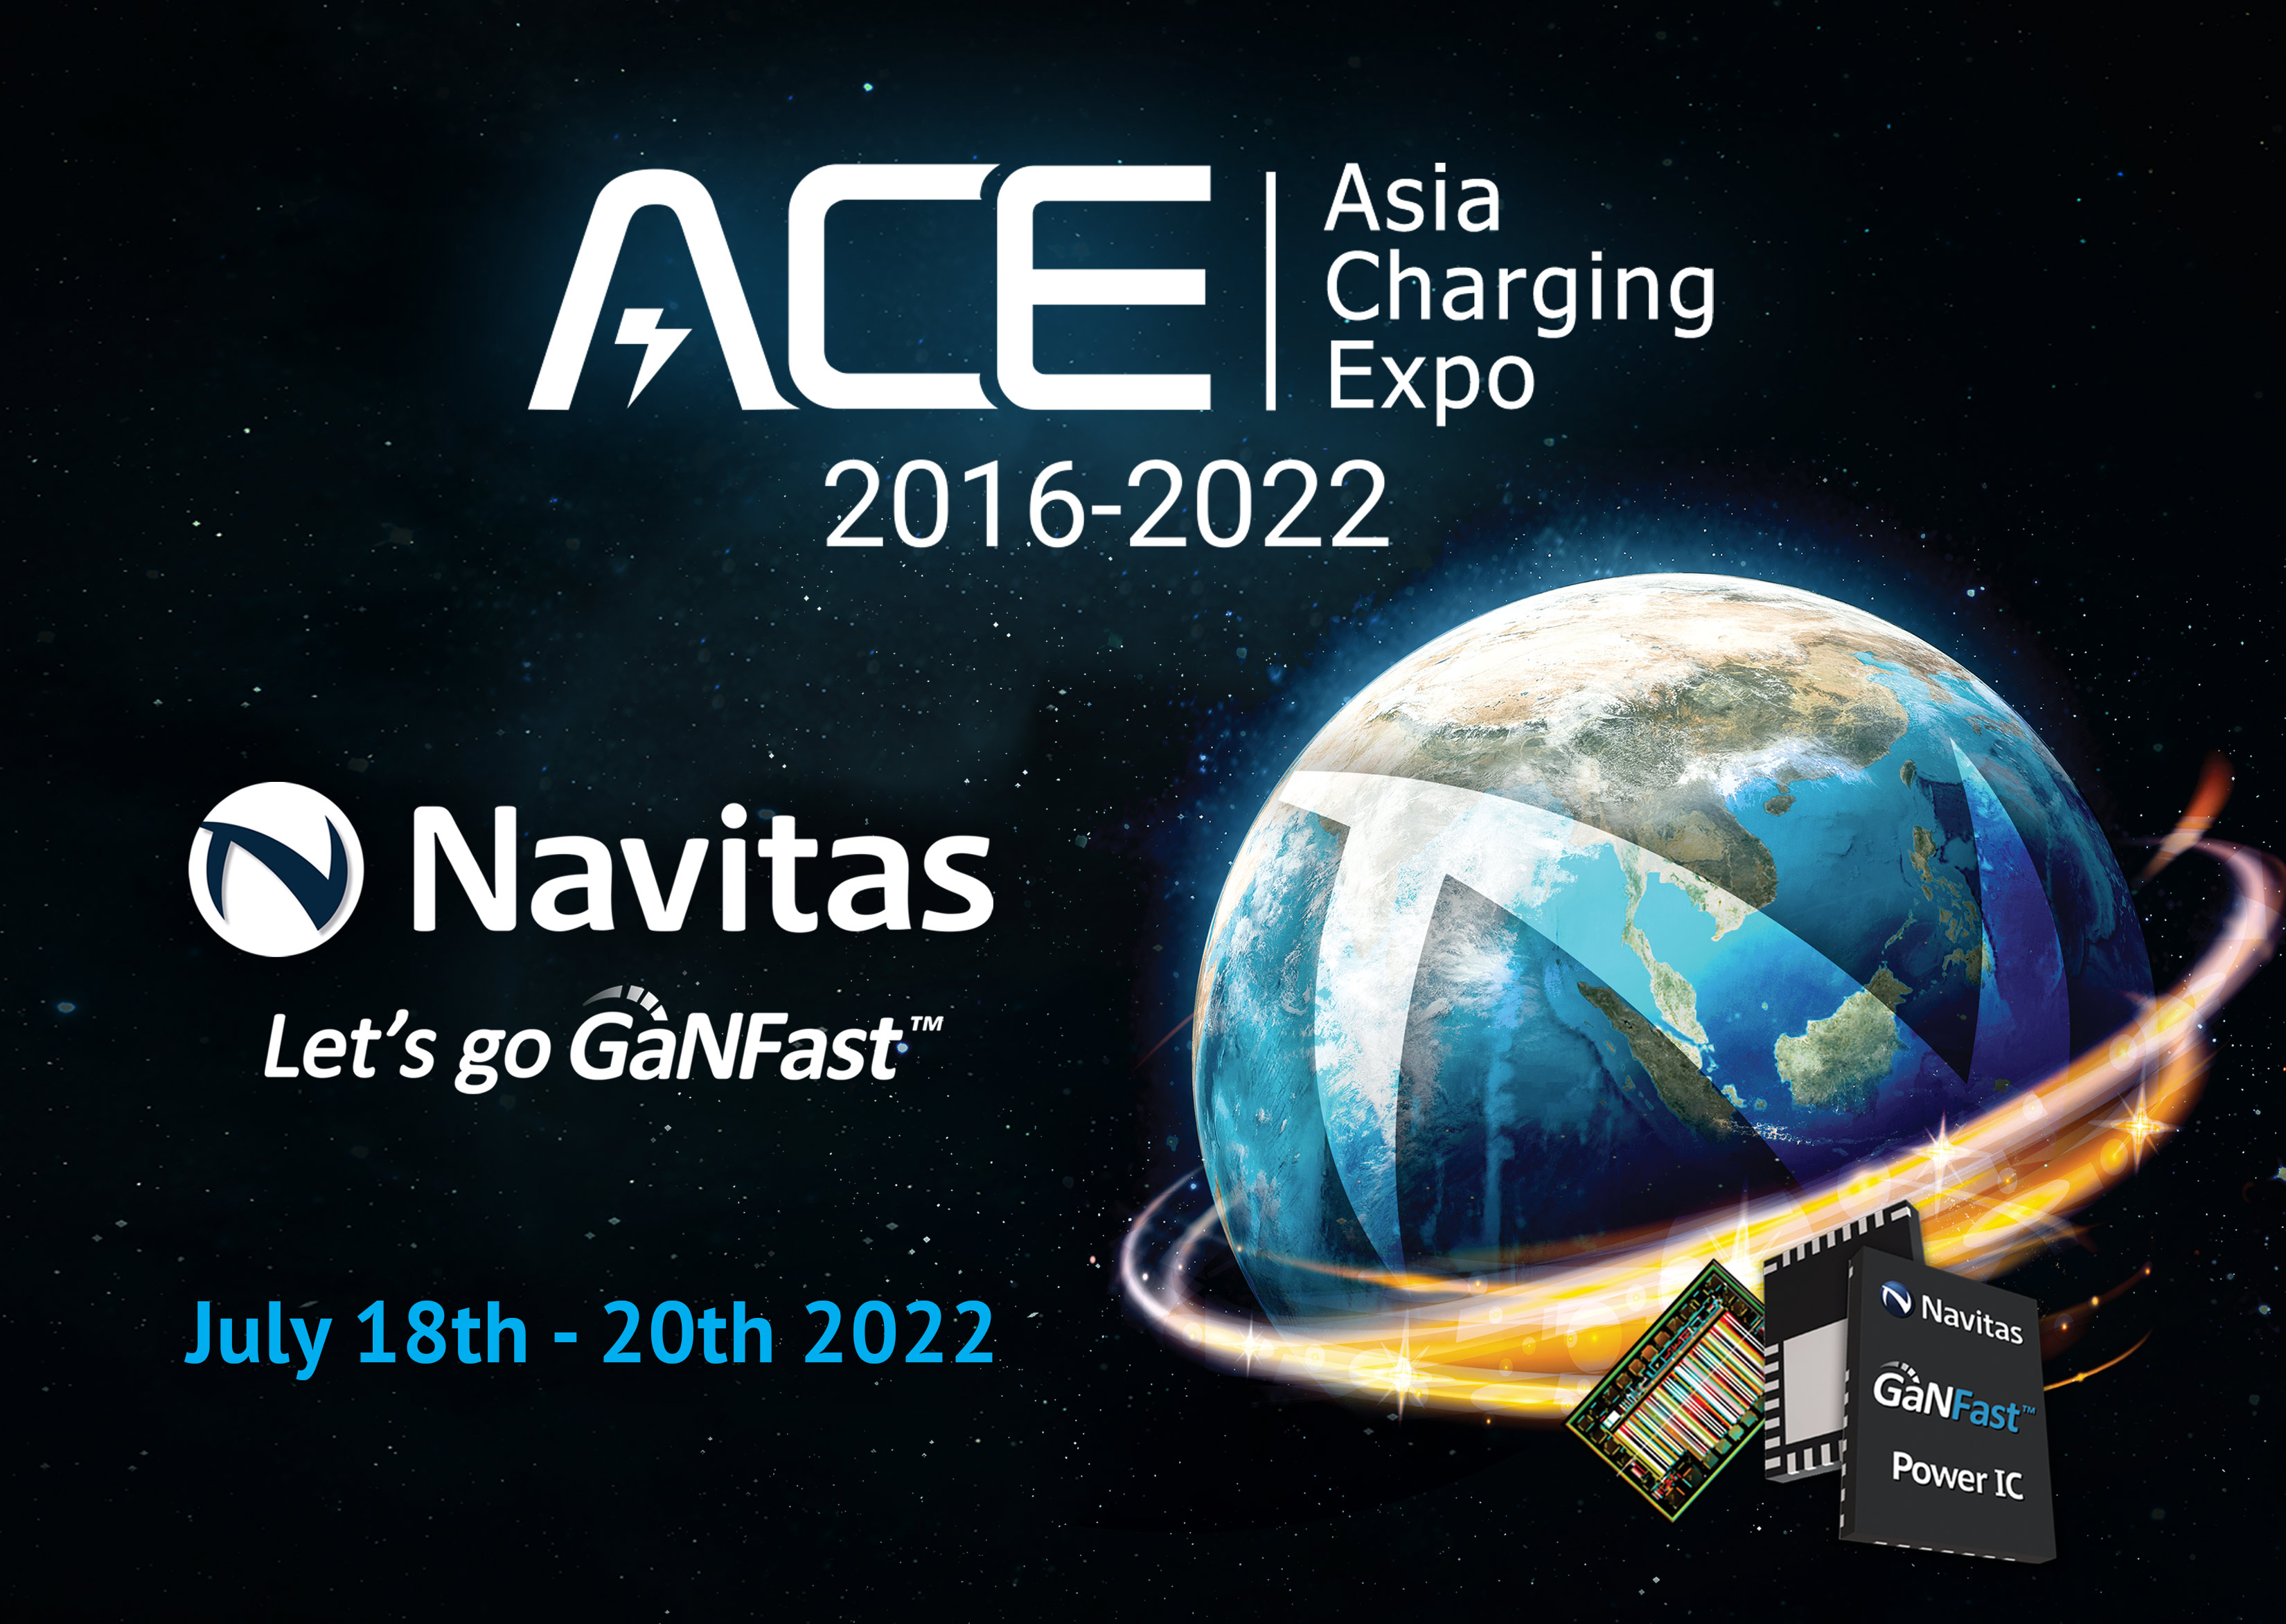 Navitas Highlights GaN-Industry Leadership in Ultra-Fast Mobile Charging at Fast-Growing Asia Expo